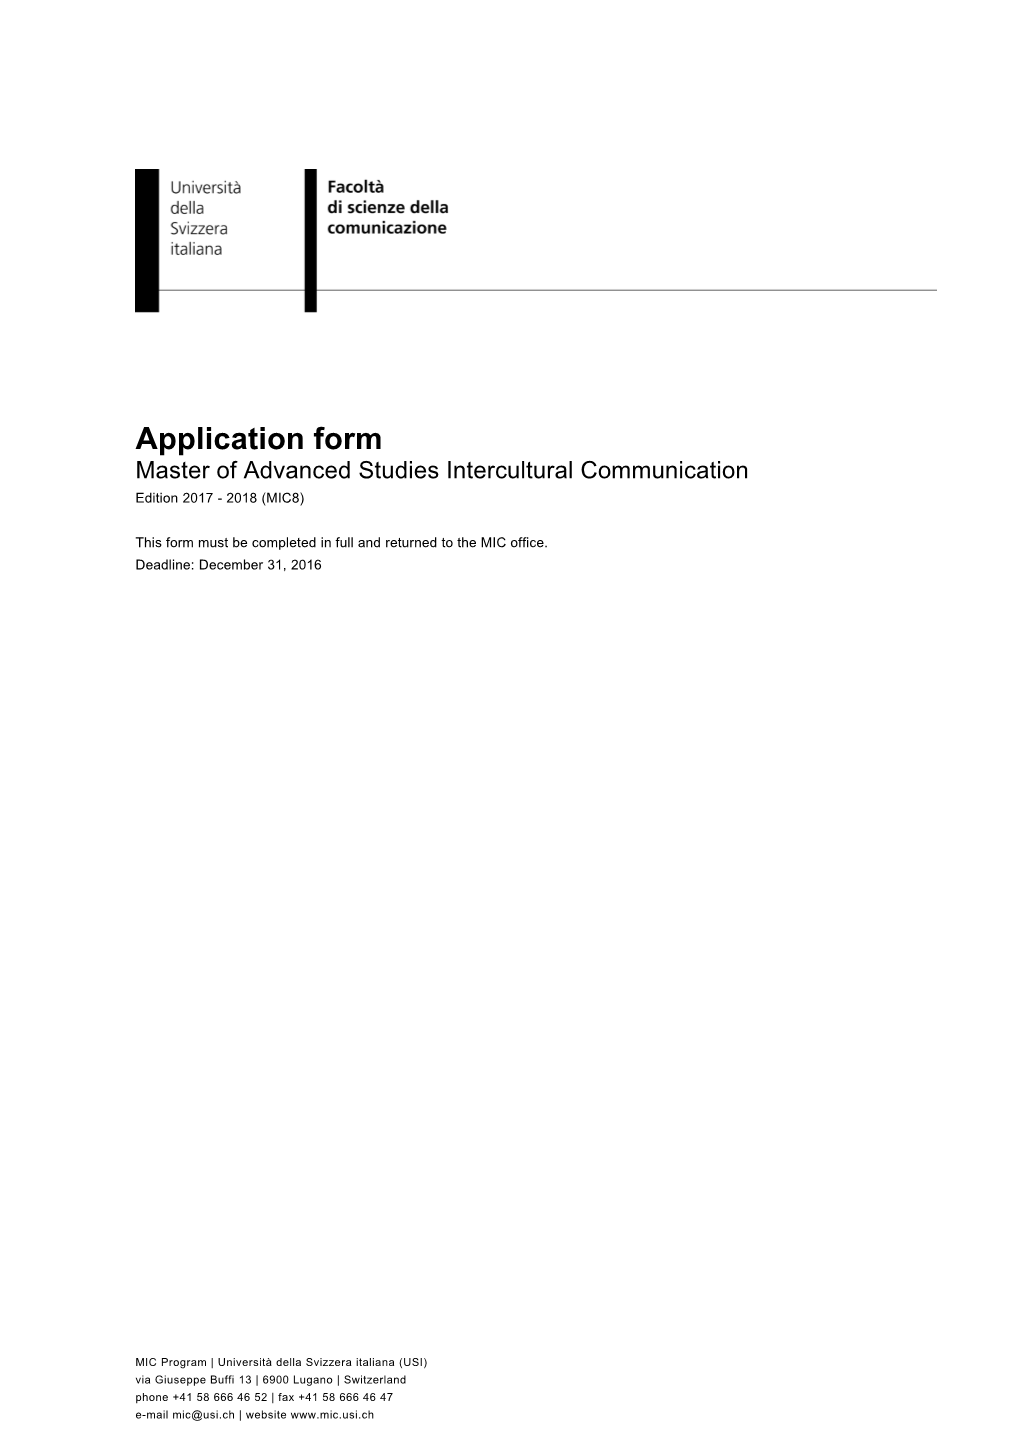 Completing the Application